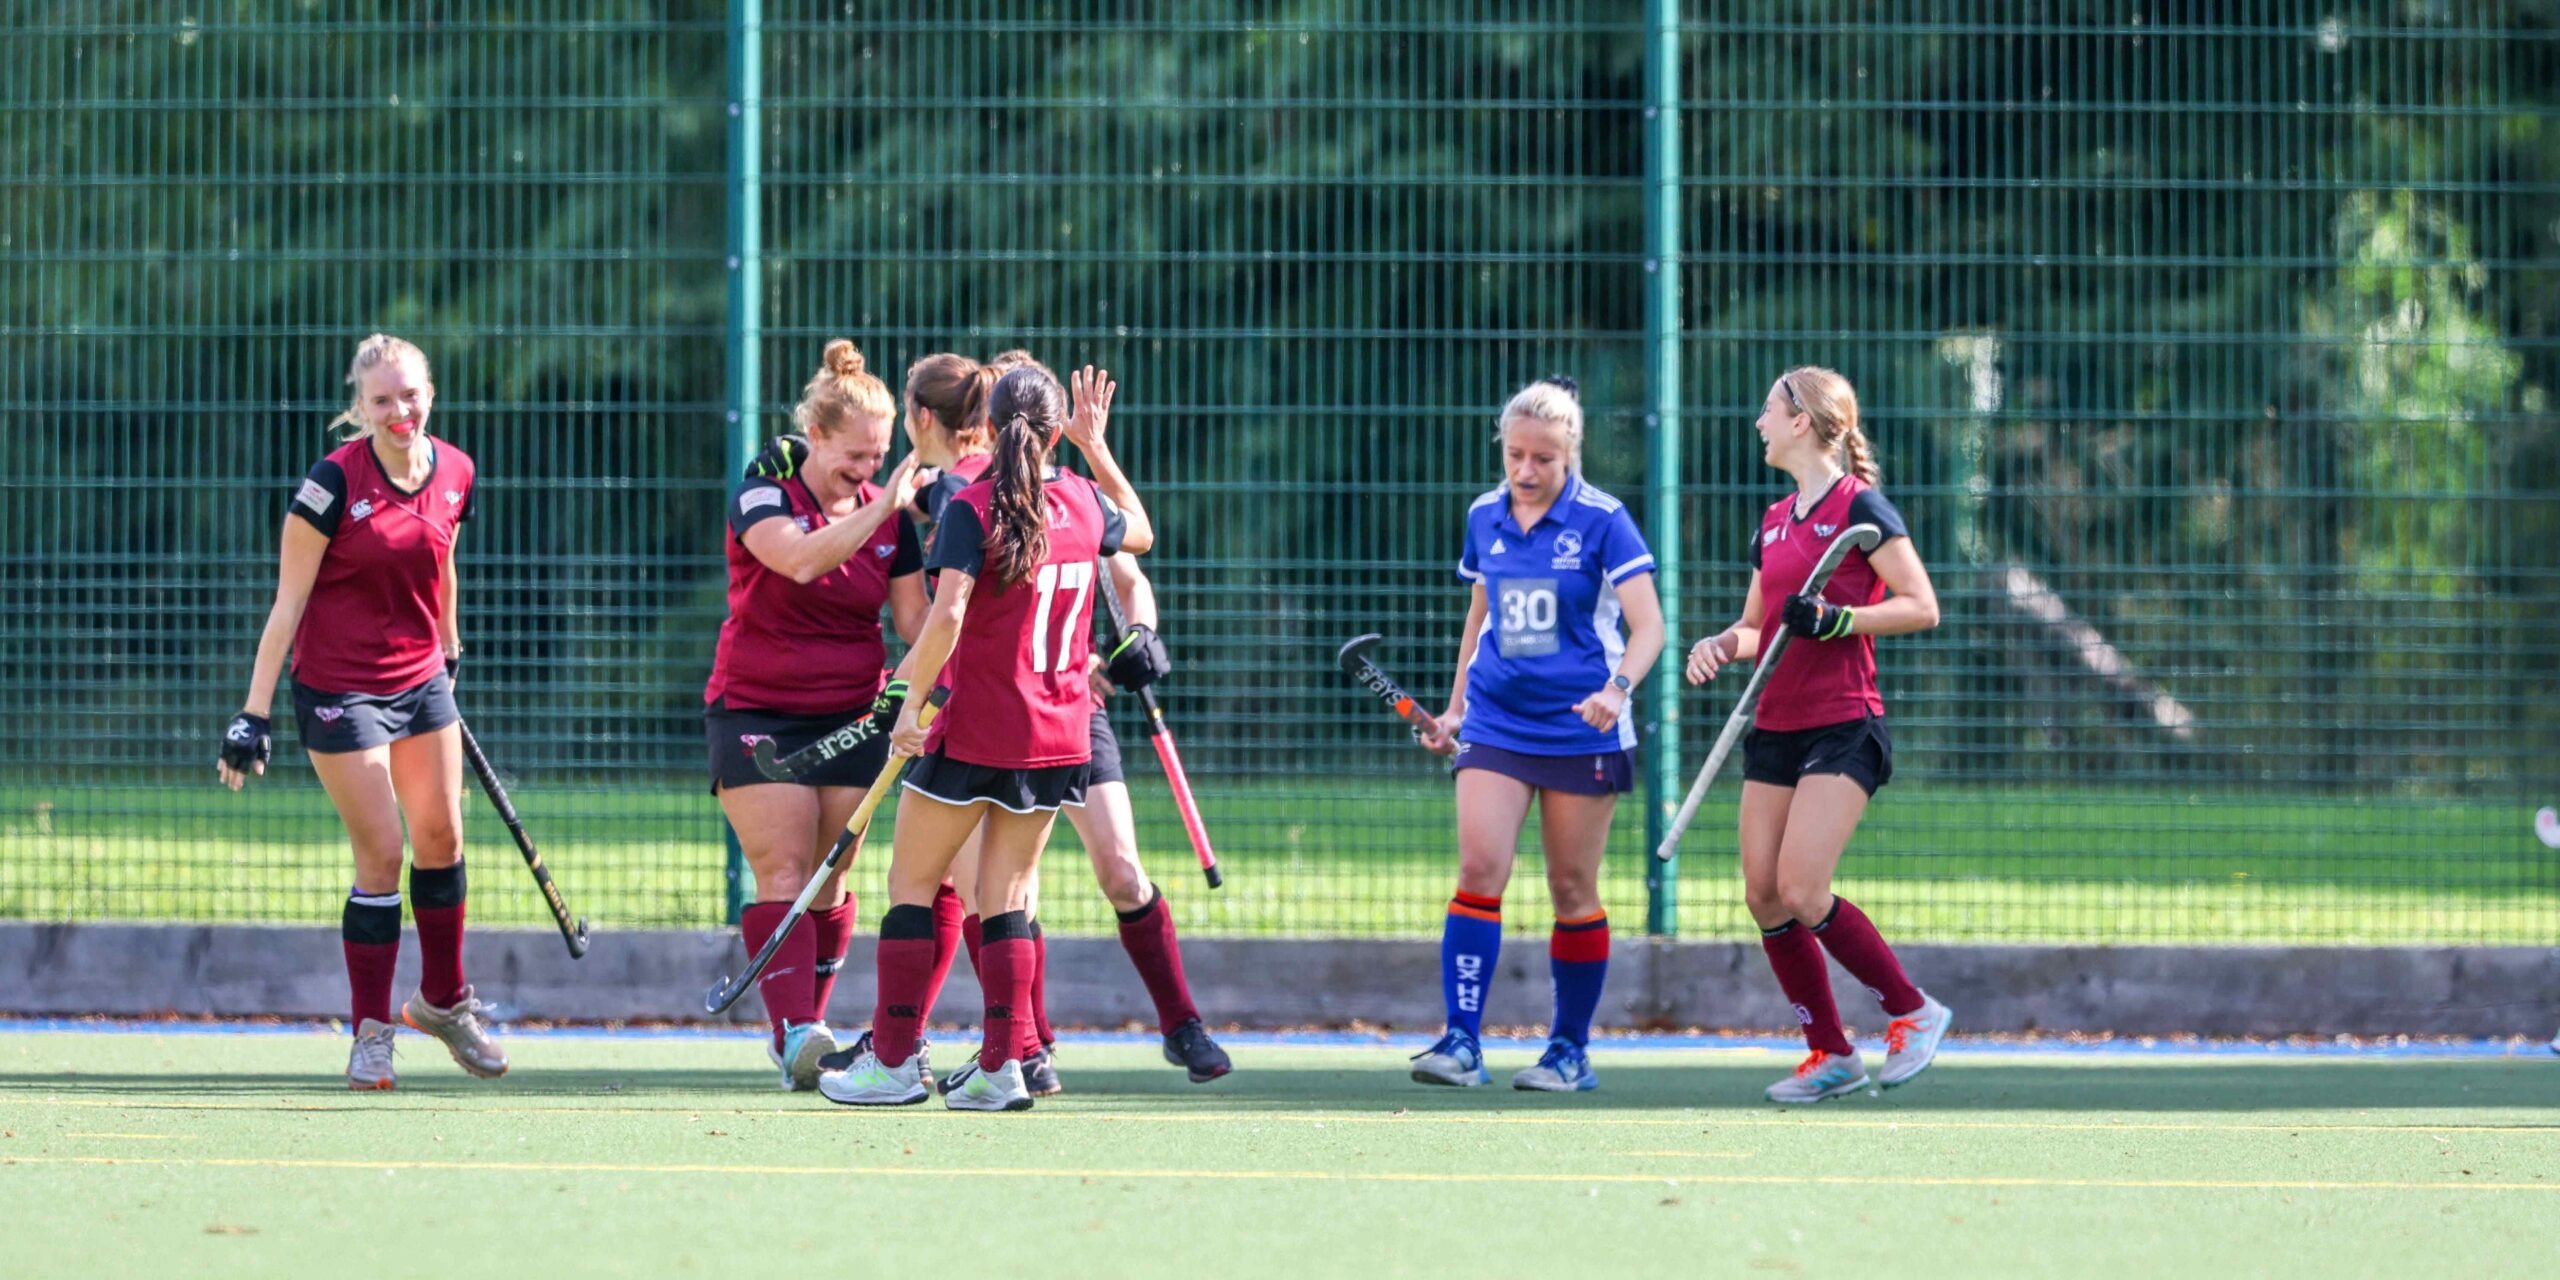 Ladies’ 2s in first loss of the season